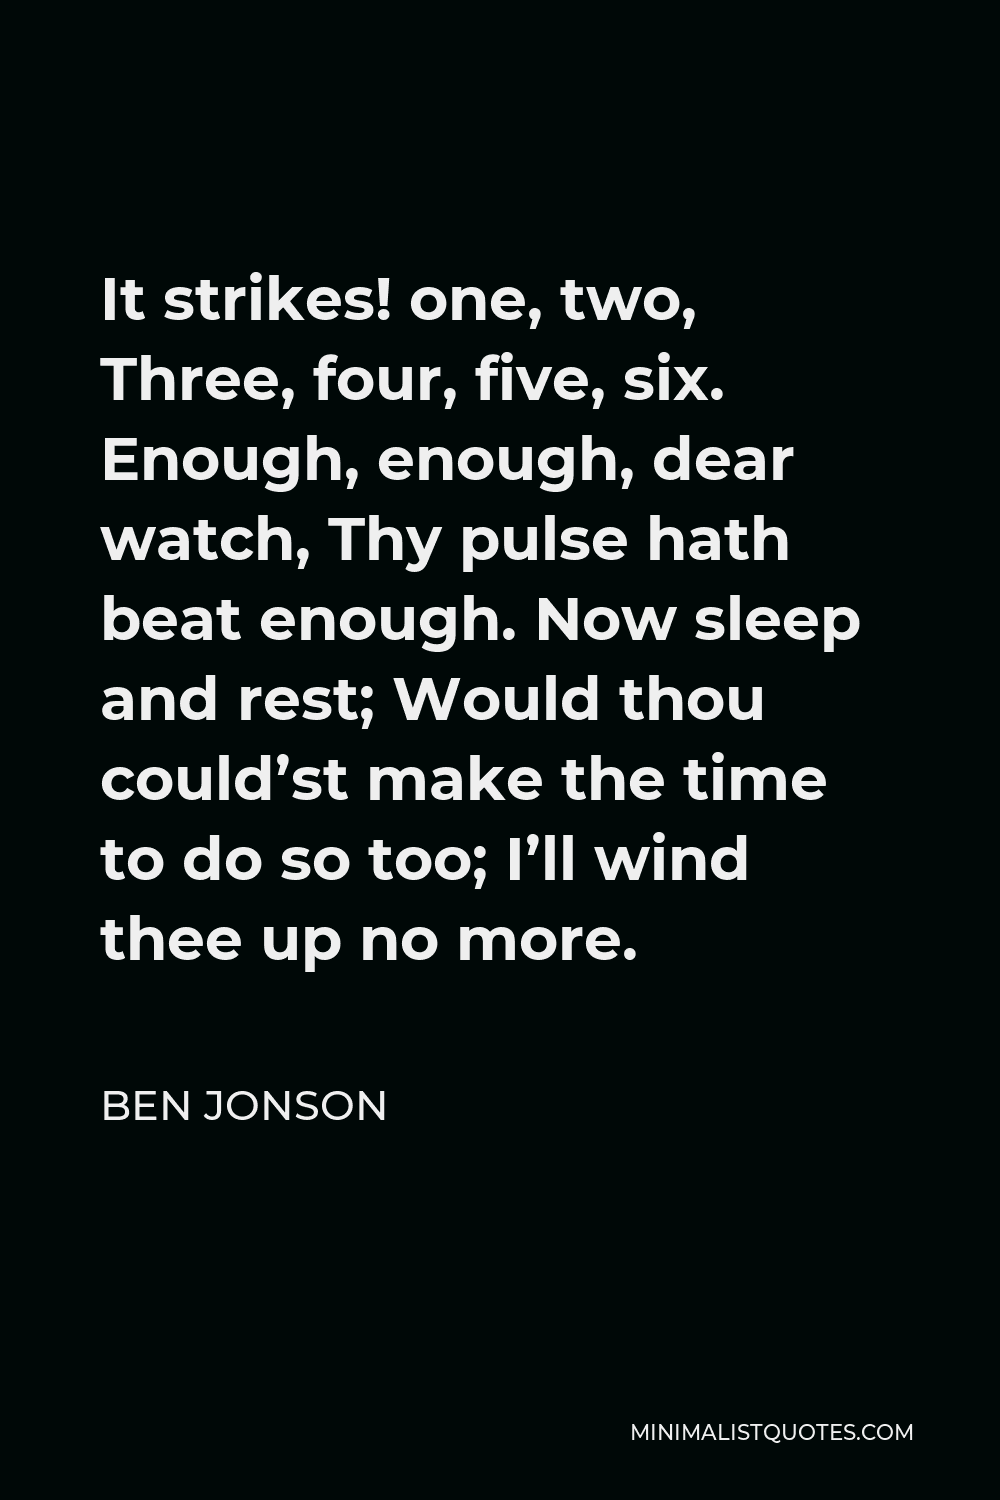 Ben Jonson Quote - It strikes! one, two, Three, four, five, six. Enough, enough, dear watch, Thy pulse hath beat enough. Now sleep and rest; Would thou could’st make the time to do so too; I’ll wind thee up no more.